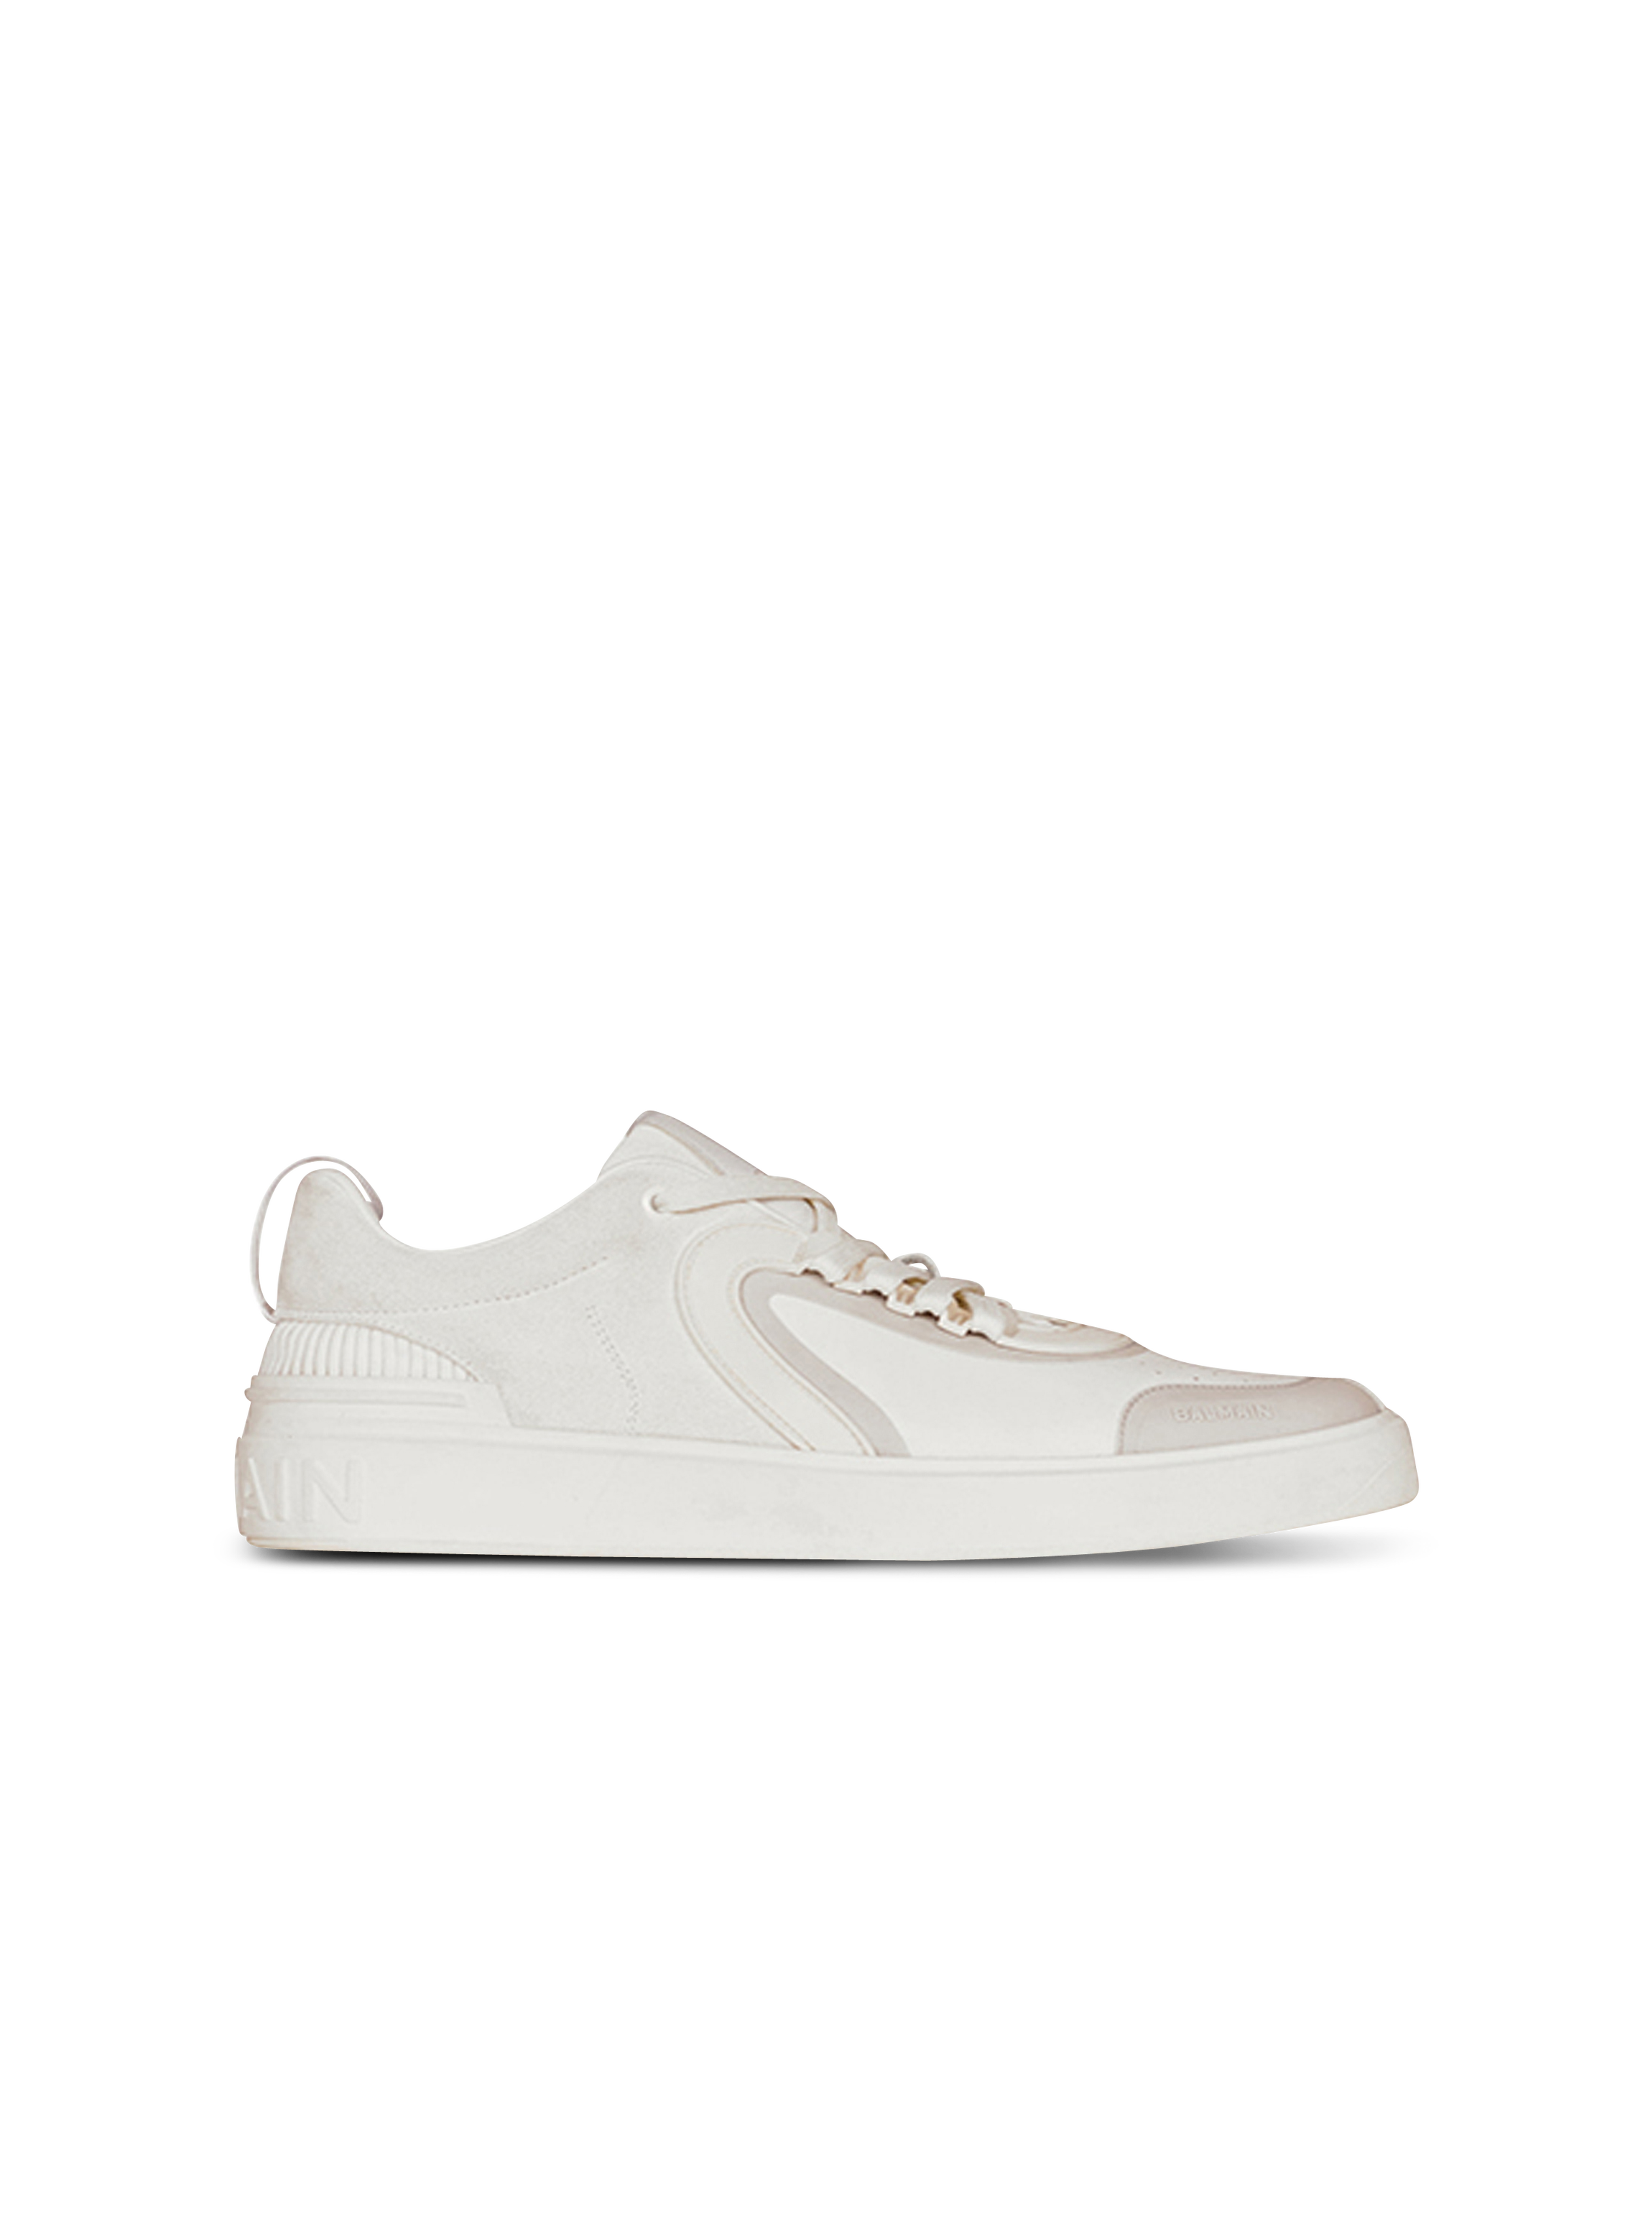 Leather and suede B-Skate sneakers, white